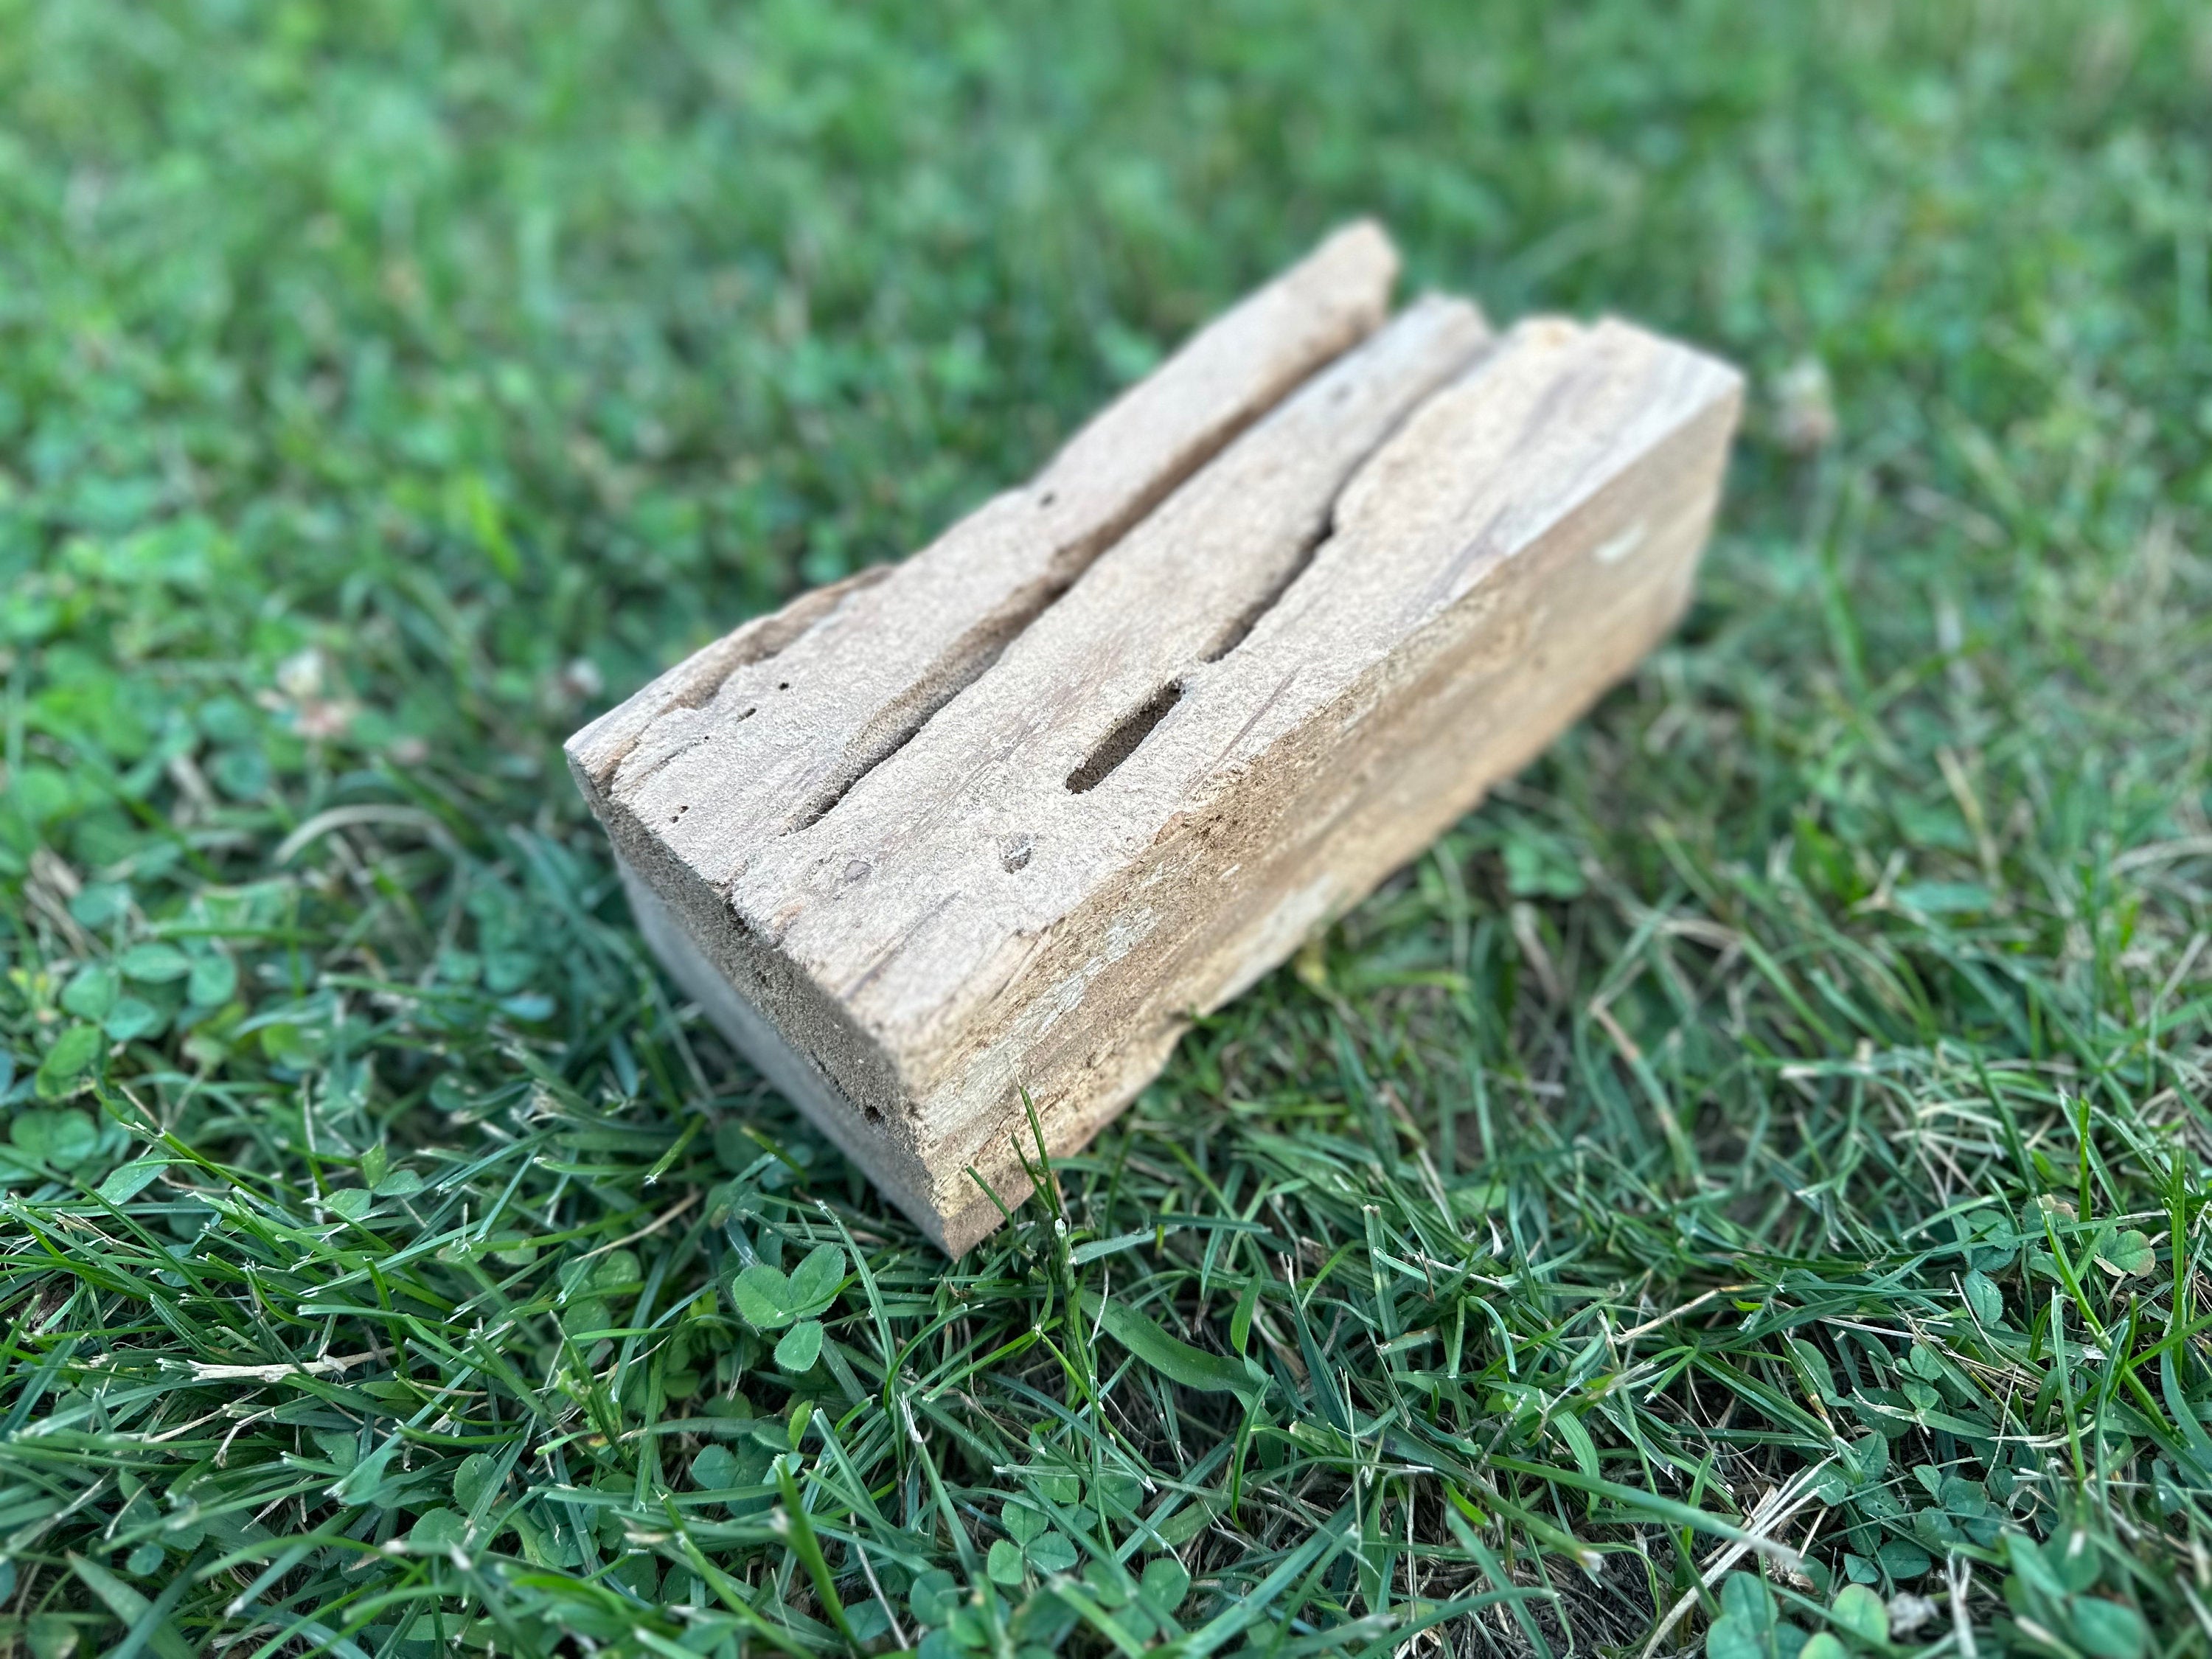 Cherry Wood Block with Natural Cuts, About 8 Inches Long x 4 Inches Wide x 2 Inches Thick